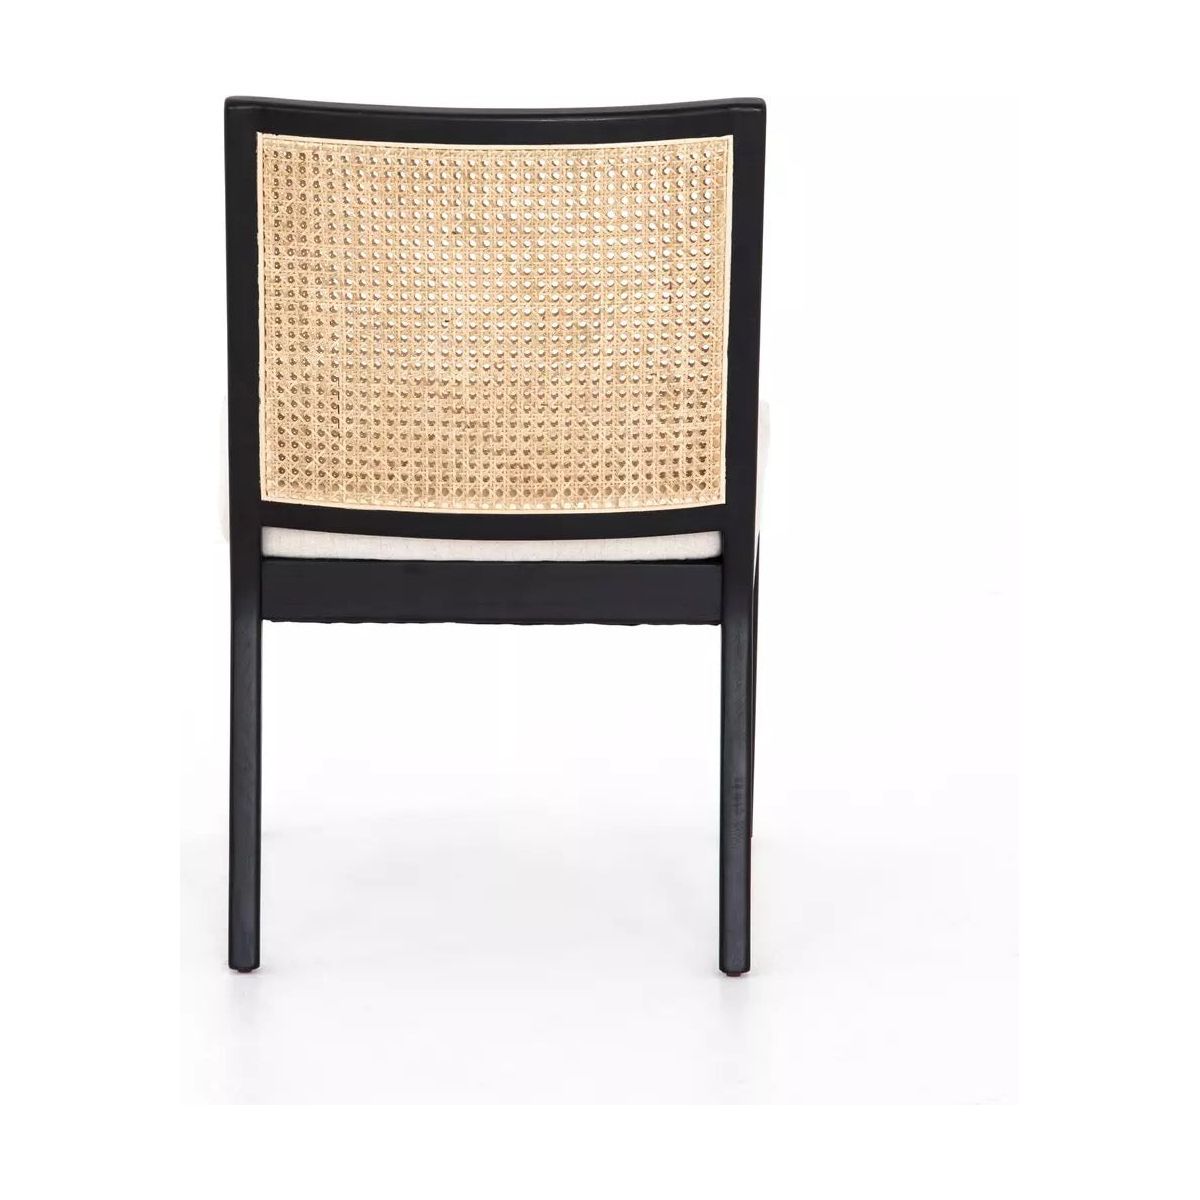 A wooden Antonia Cane Armless Dining Chair with a natural woven cane backrest. The black frame features four straight legs, supporting a cushioned seat in high-performance fabric seating. The durable dining chair is showcased on a plain white background.